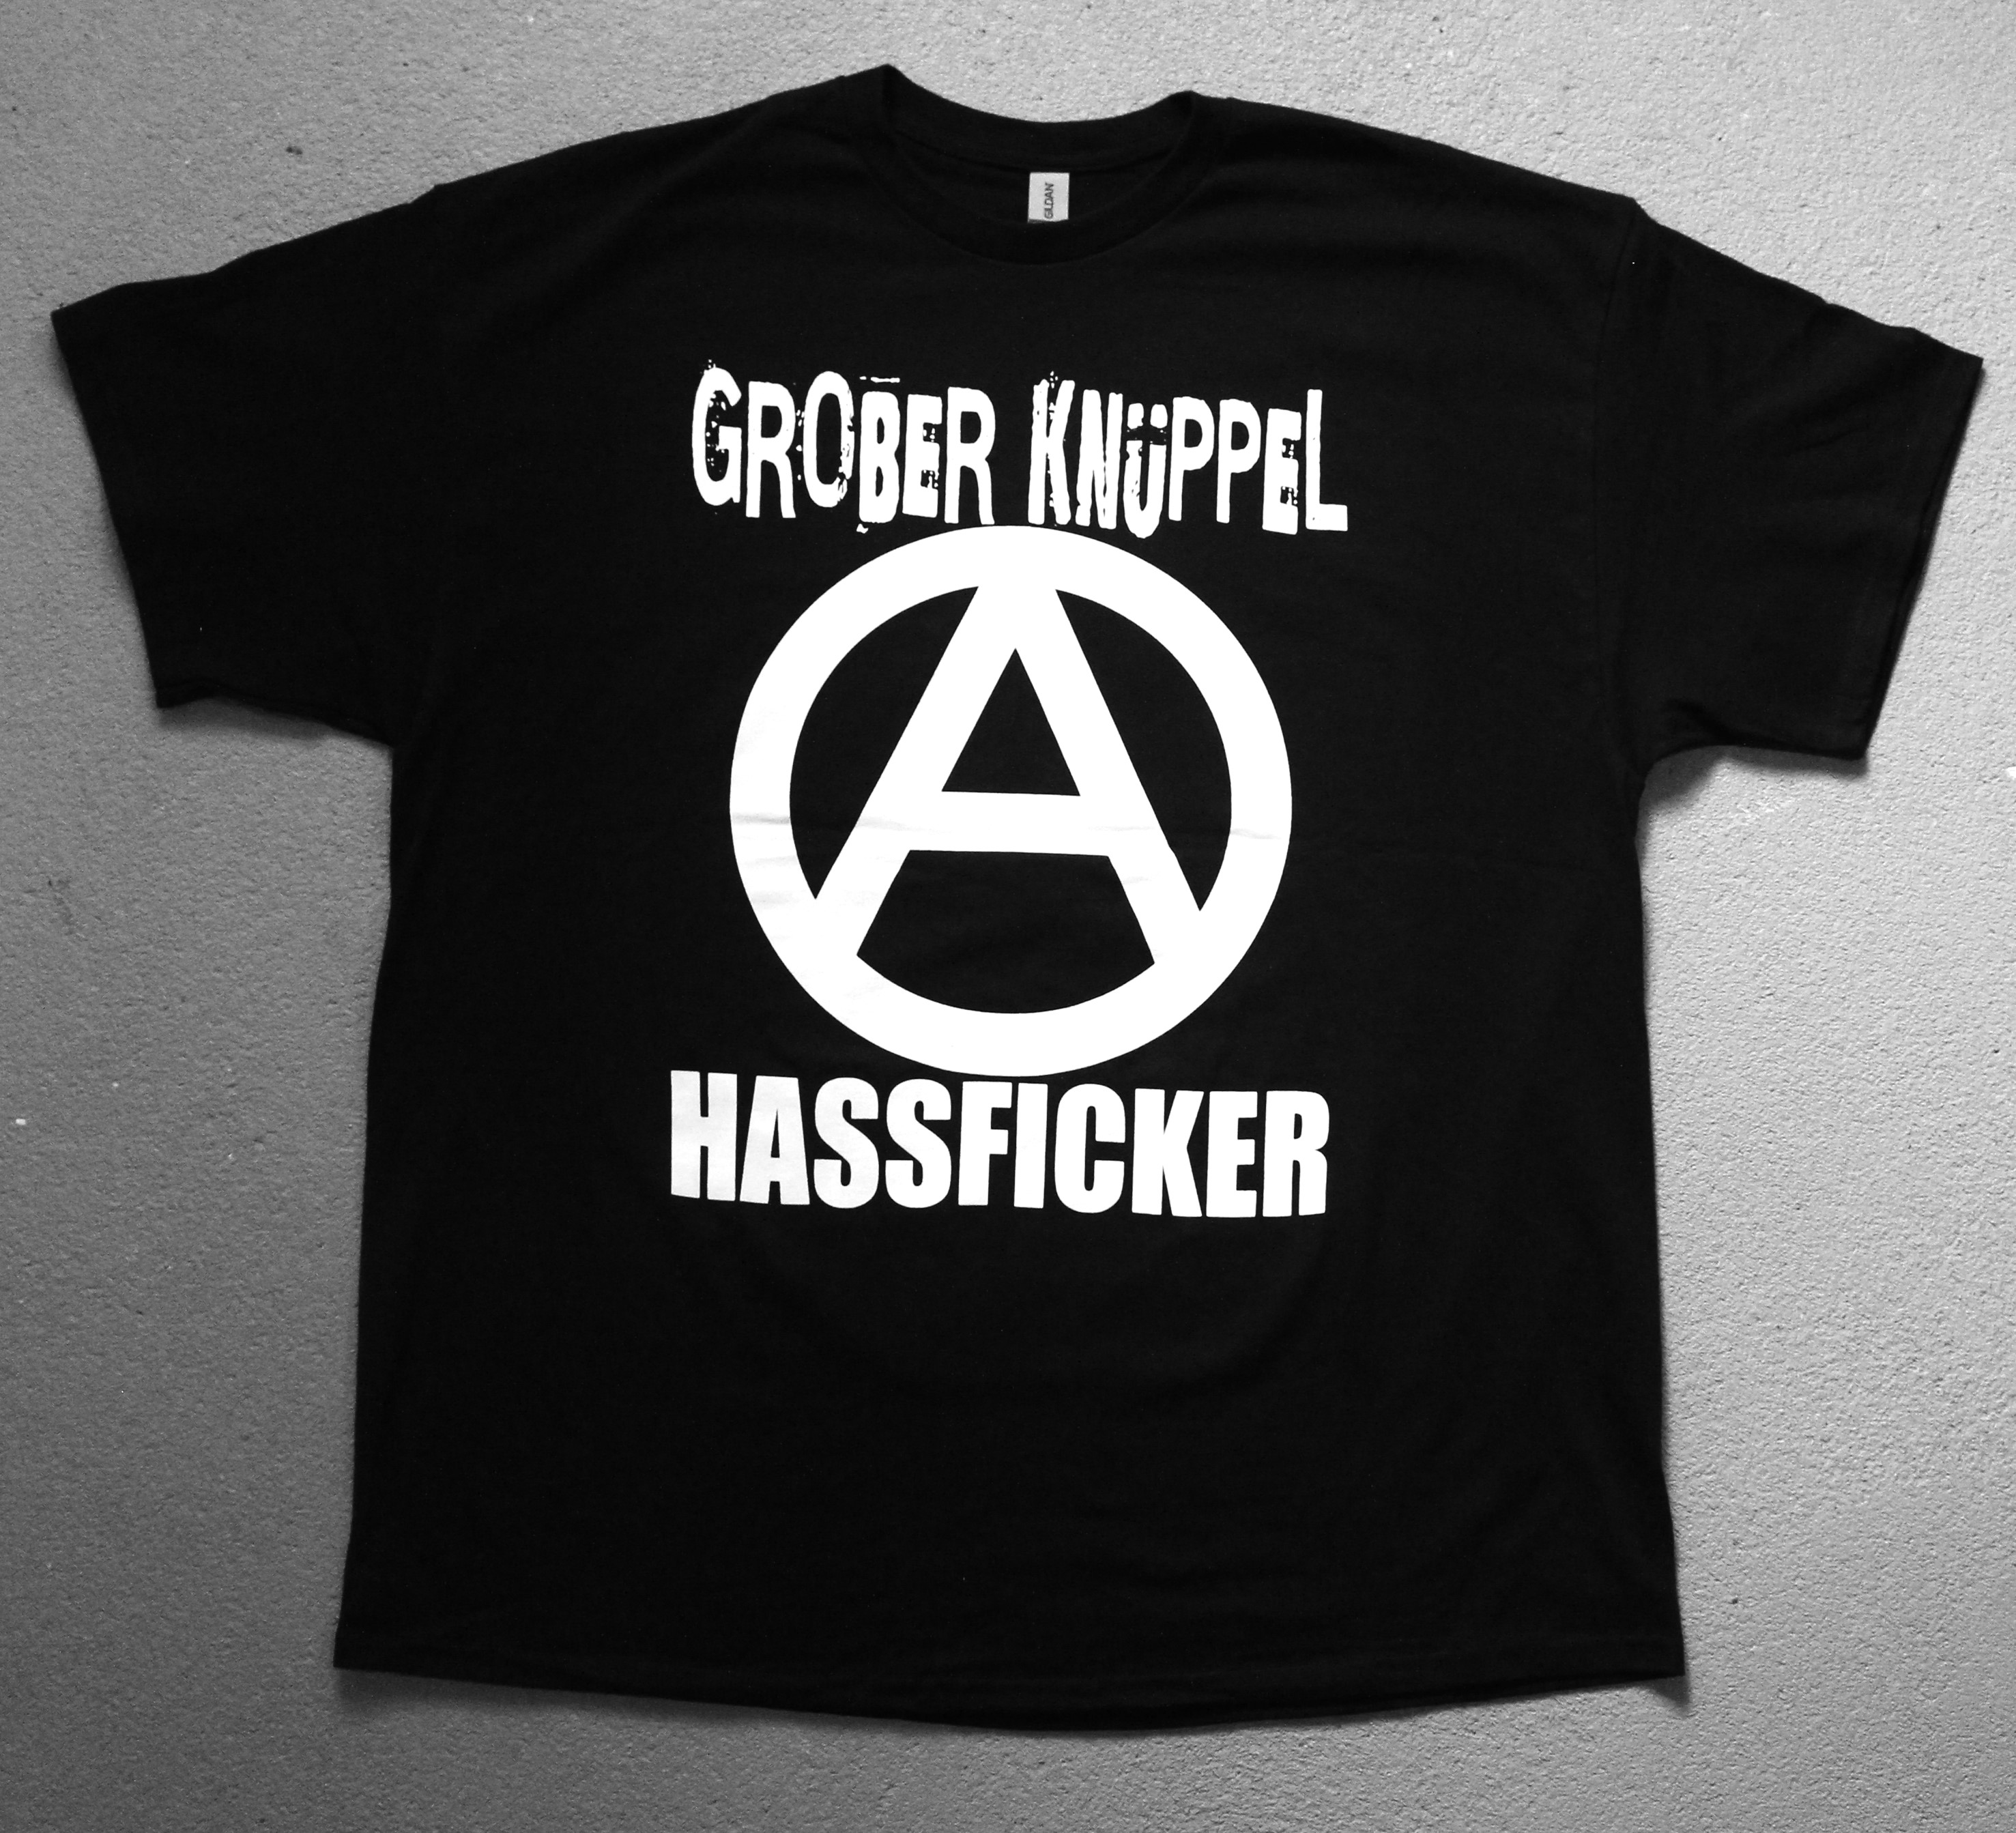 GROBER KNÜPPEL "Anarchie Hassficker" T-Shirt